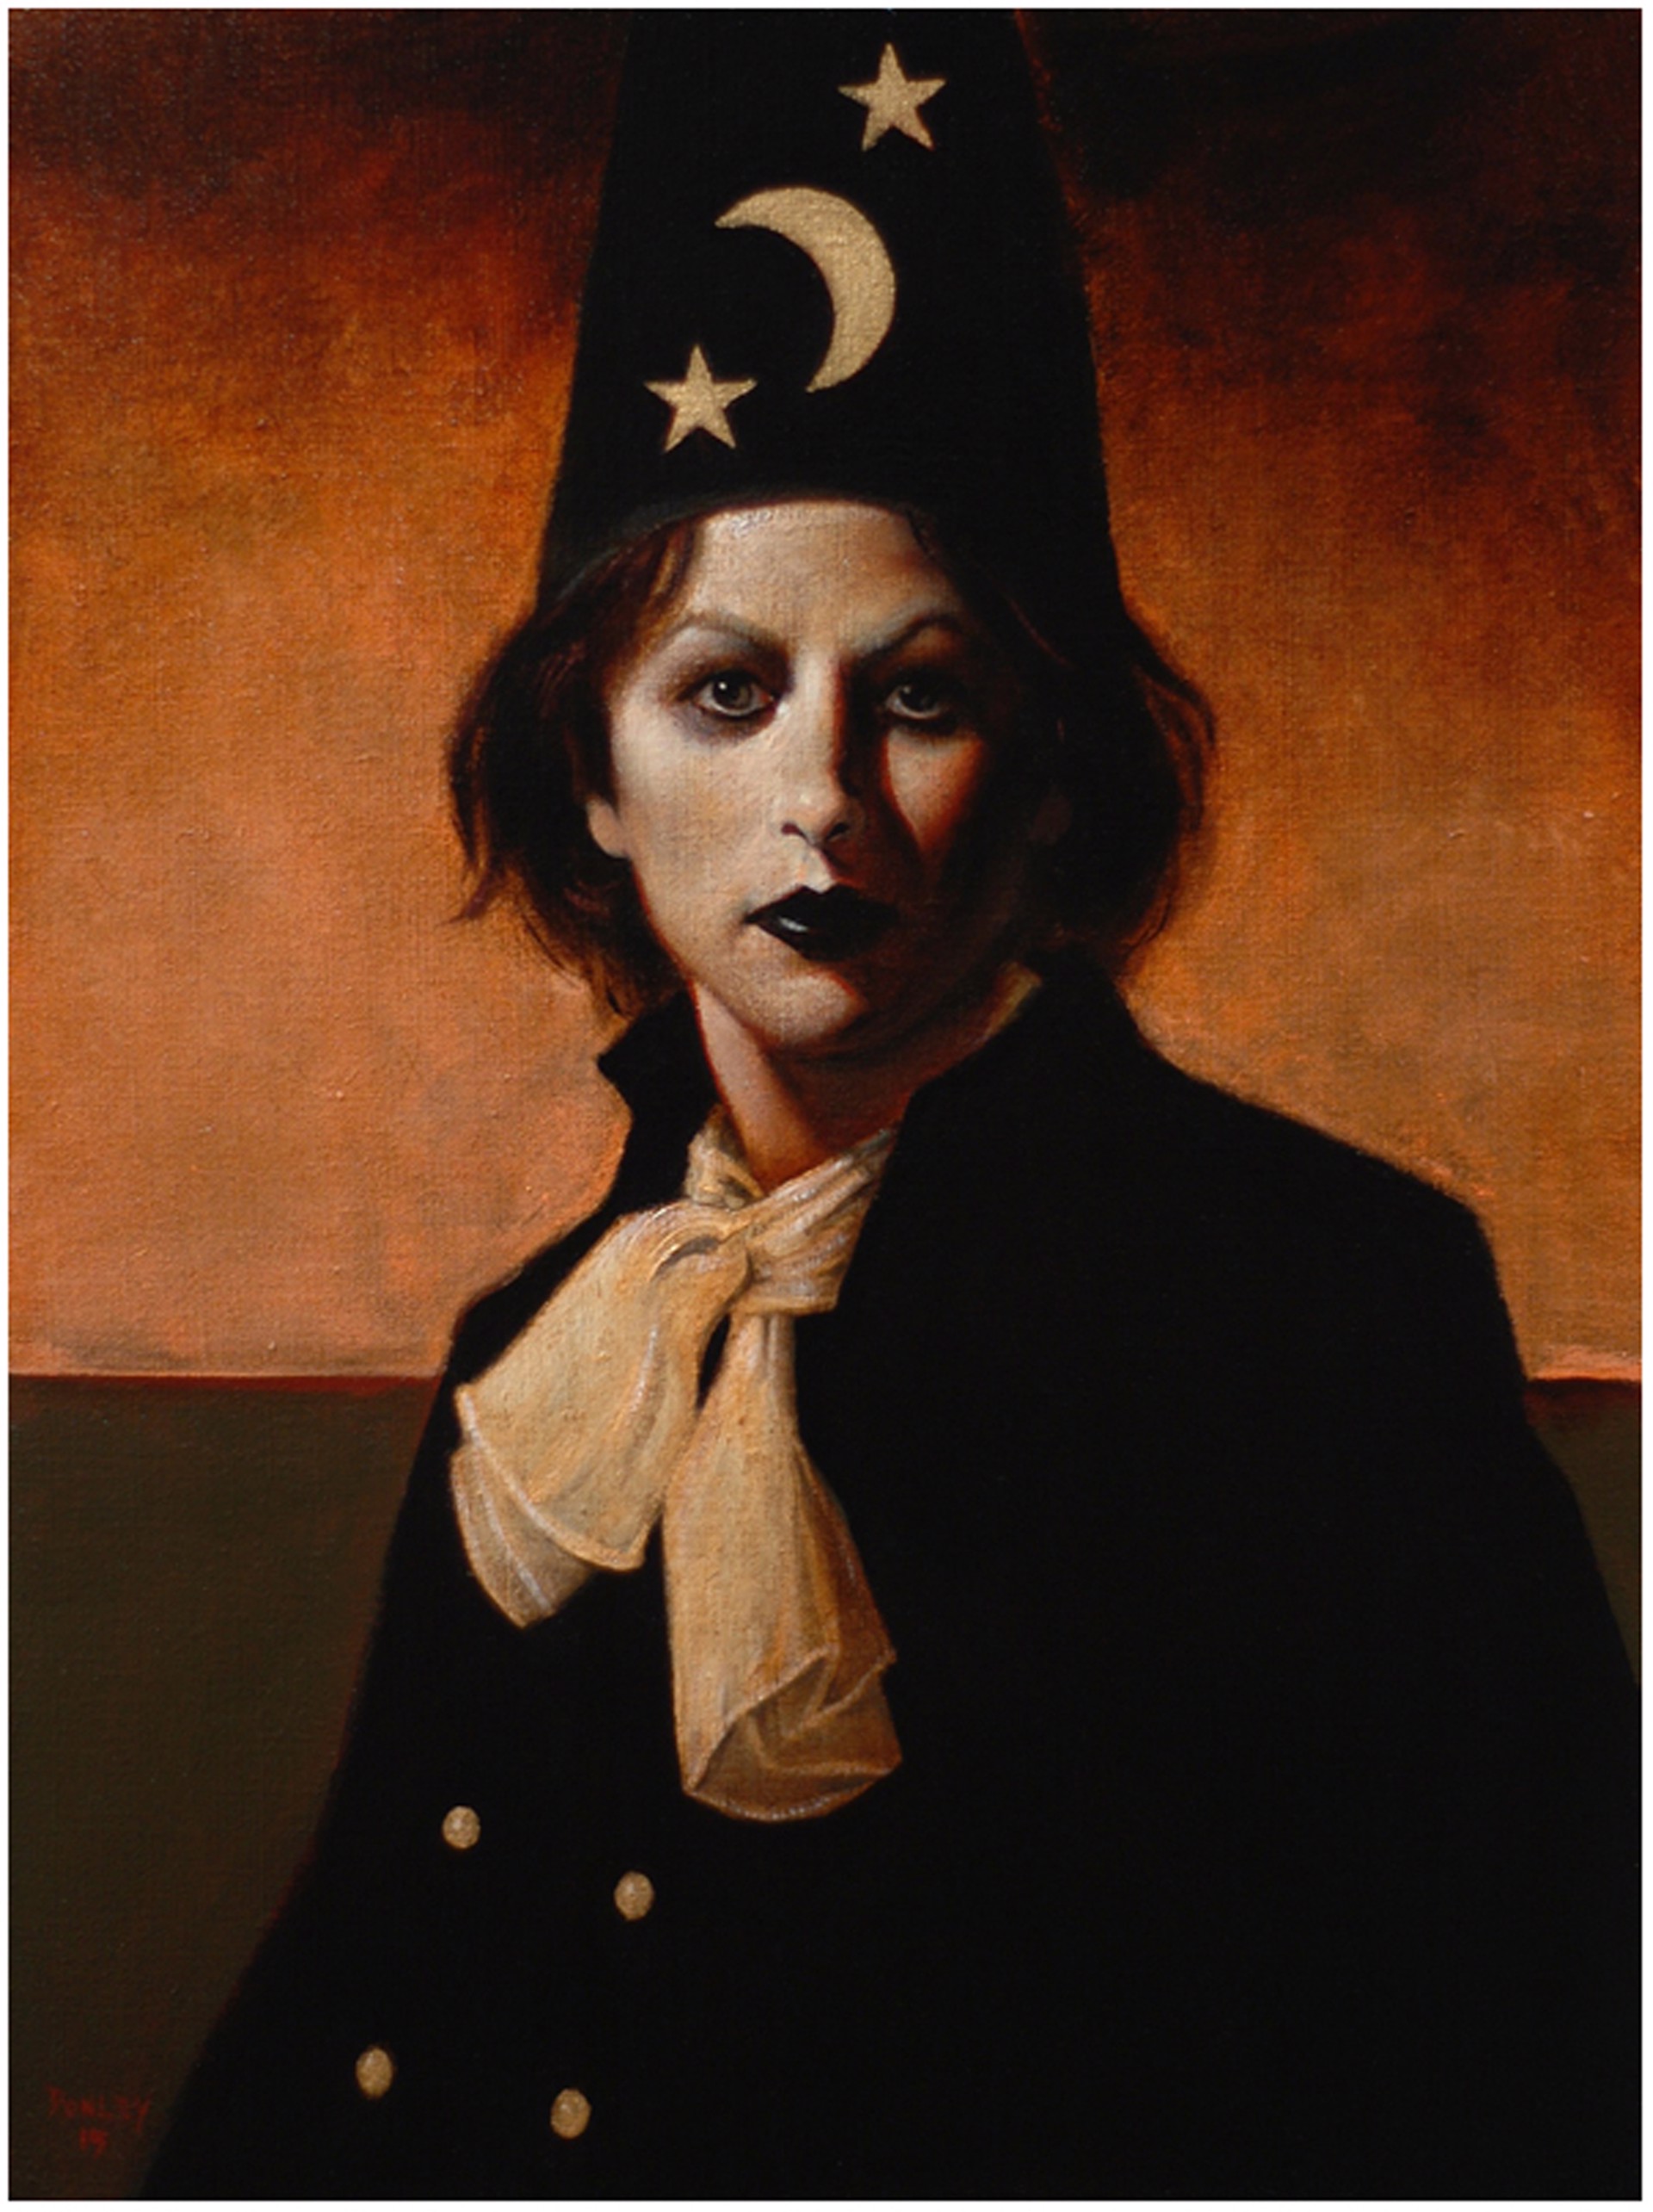 Sorcerer No. 12 by Ray Donley